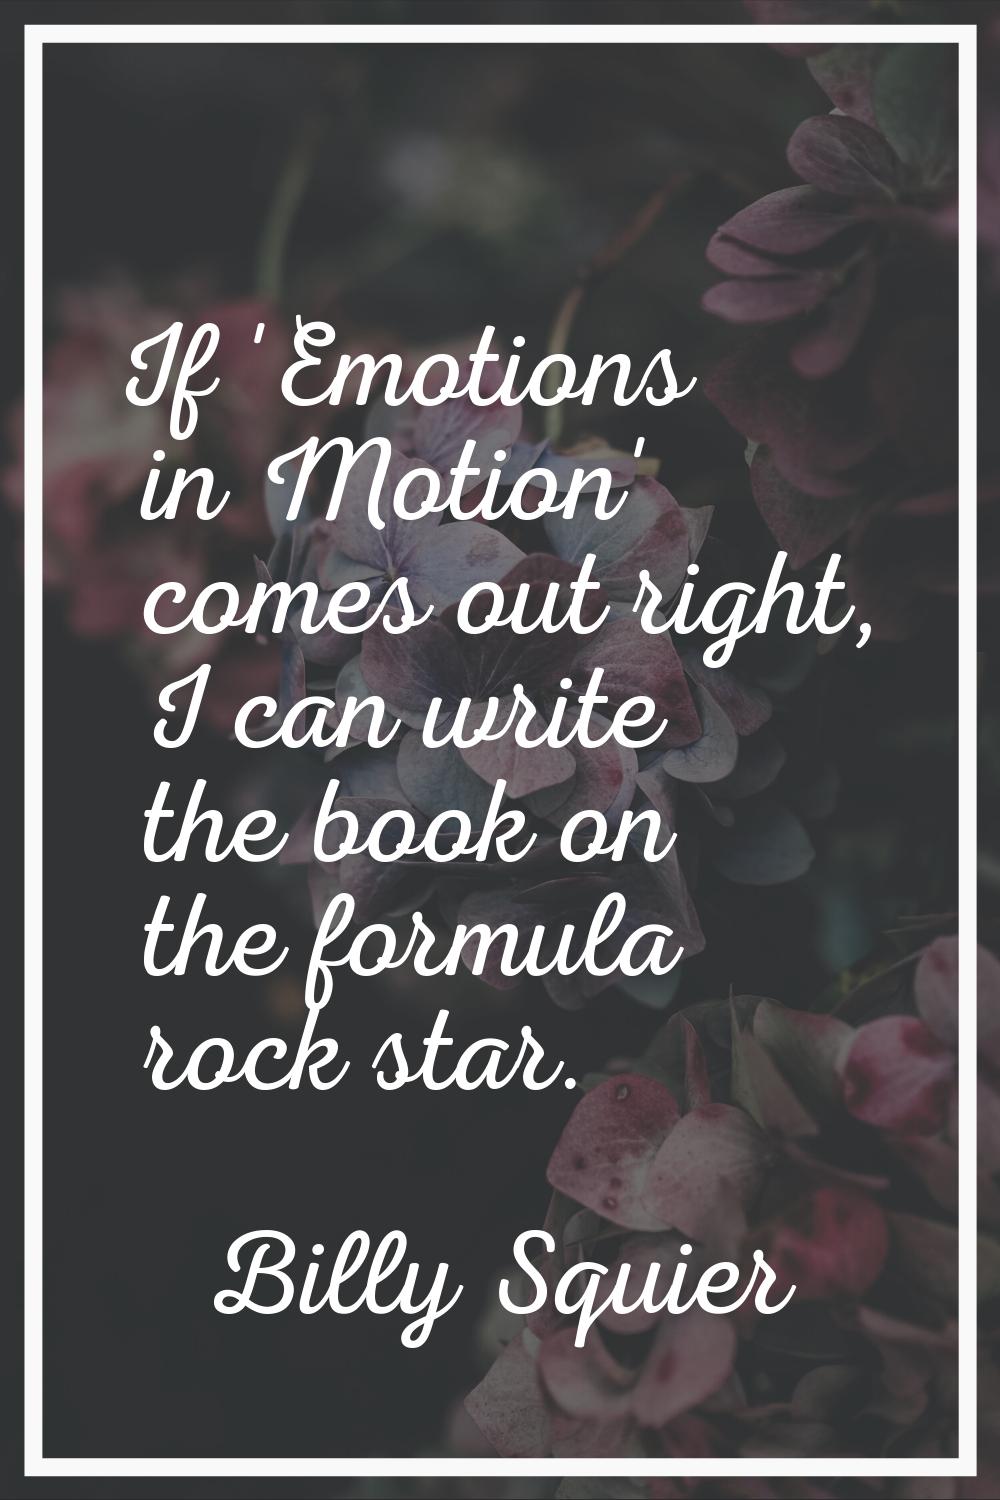 If 'Emotions in Motion' comes out right, I can write the book on the formula rock star.